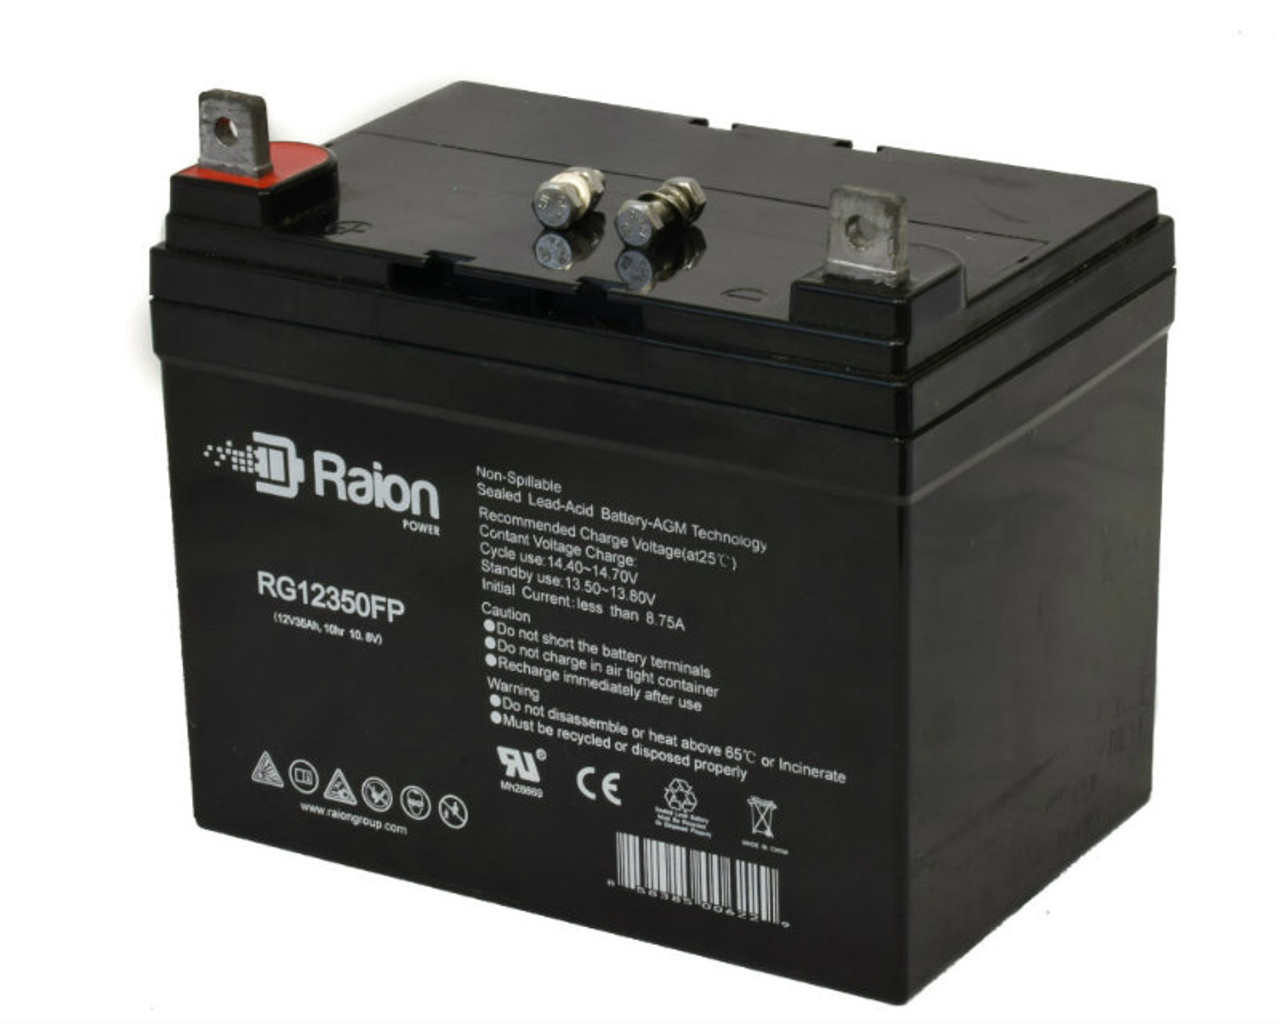 Raion Power Replacement 12V 35Ah RG12350FP Mobility Scooter Battery for Ranger All Seasons 2X3